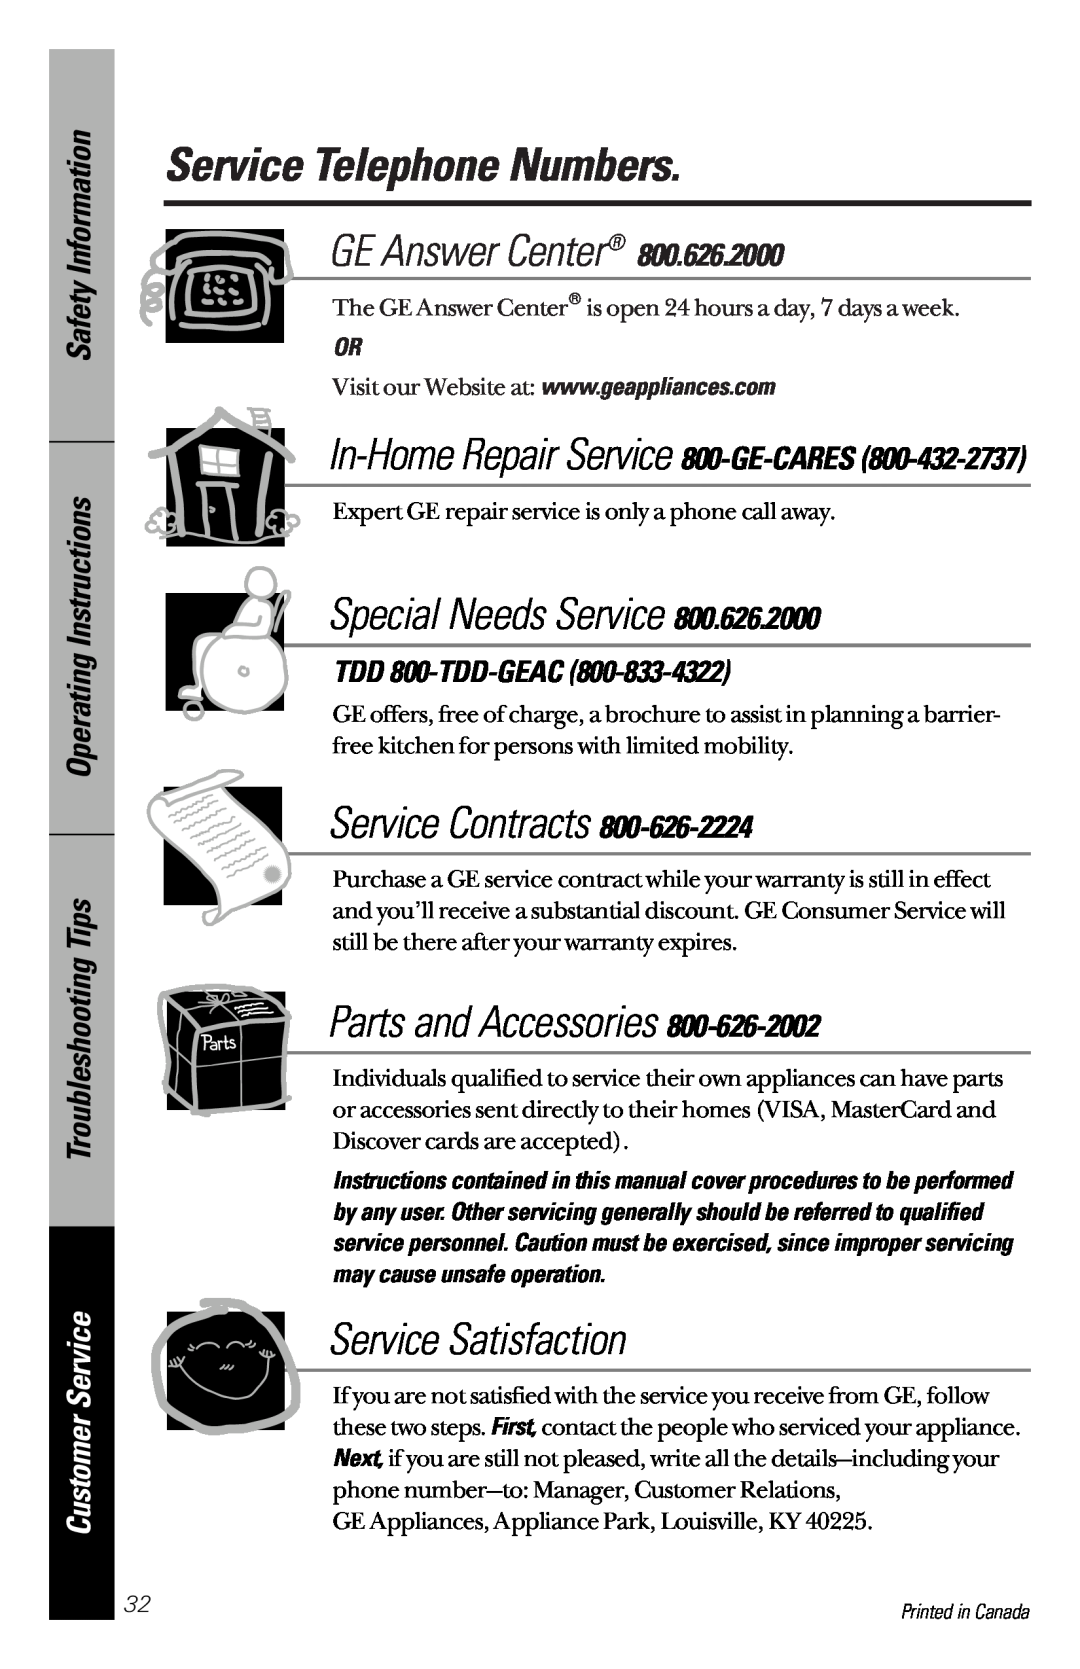 GE GSC3200 Service Telephone Numbers, GE Answer Center, Special Needs Service, Service Contracts, Parts and Accessories 